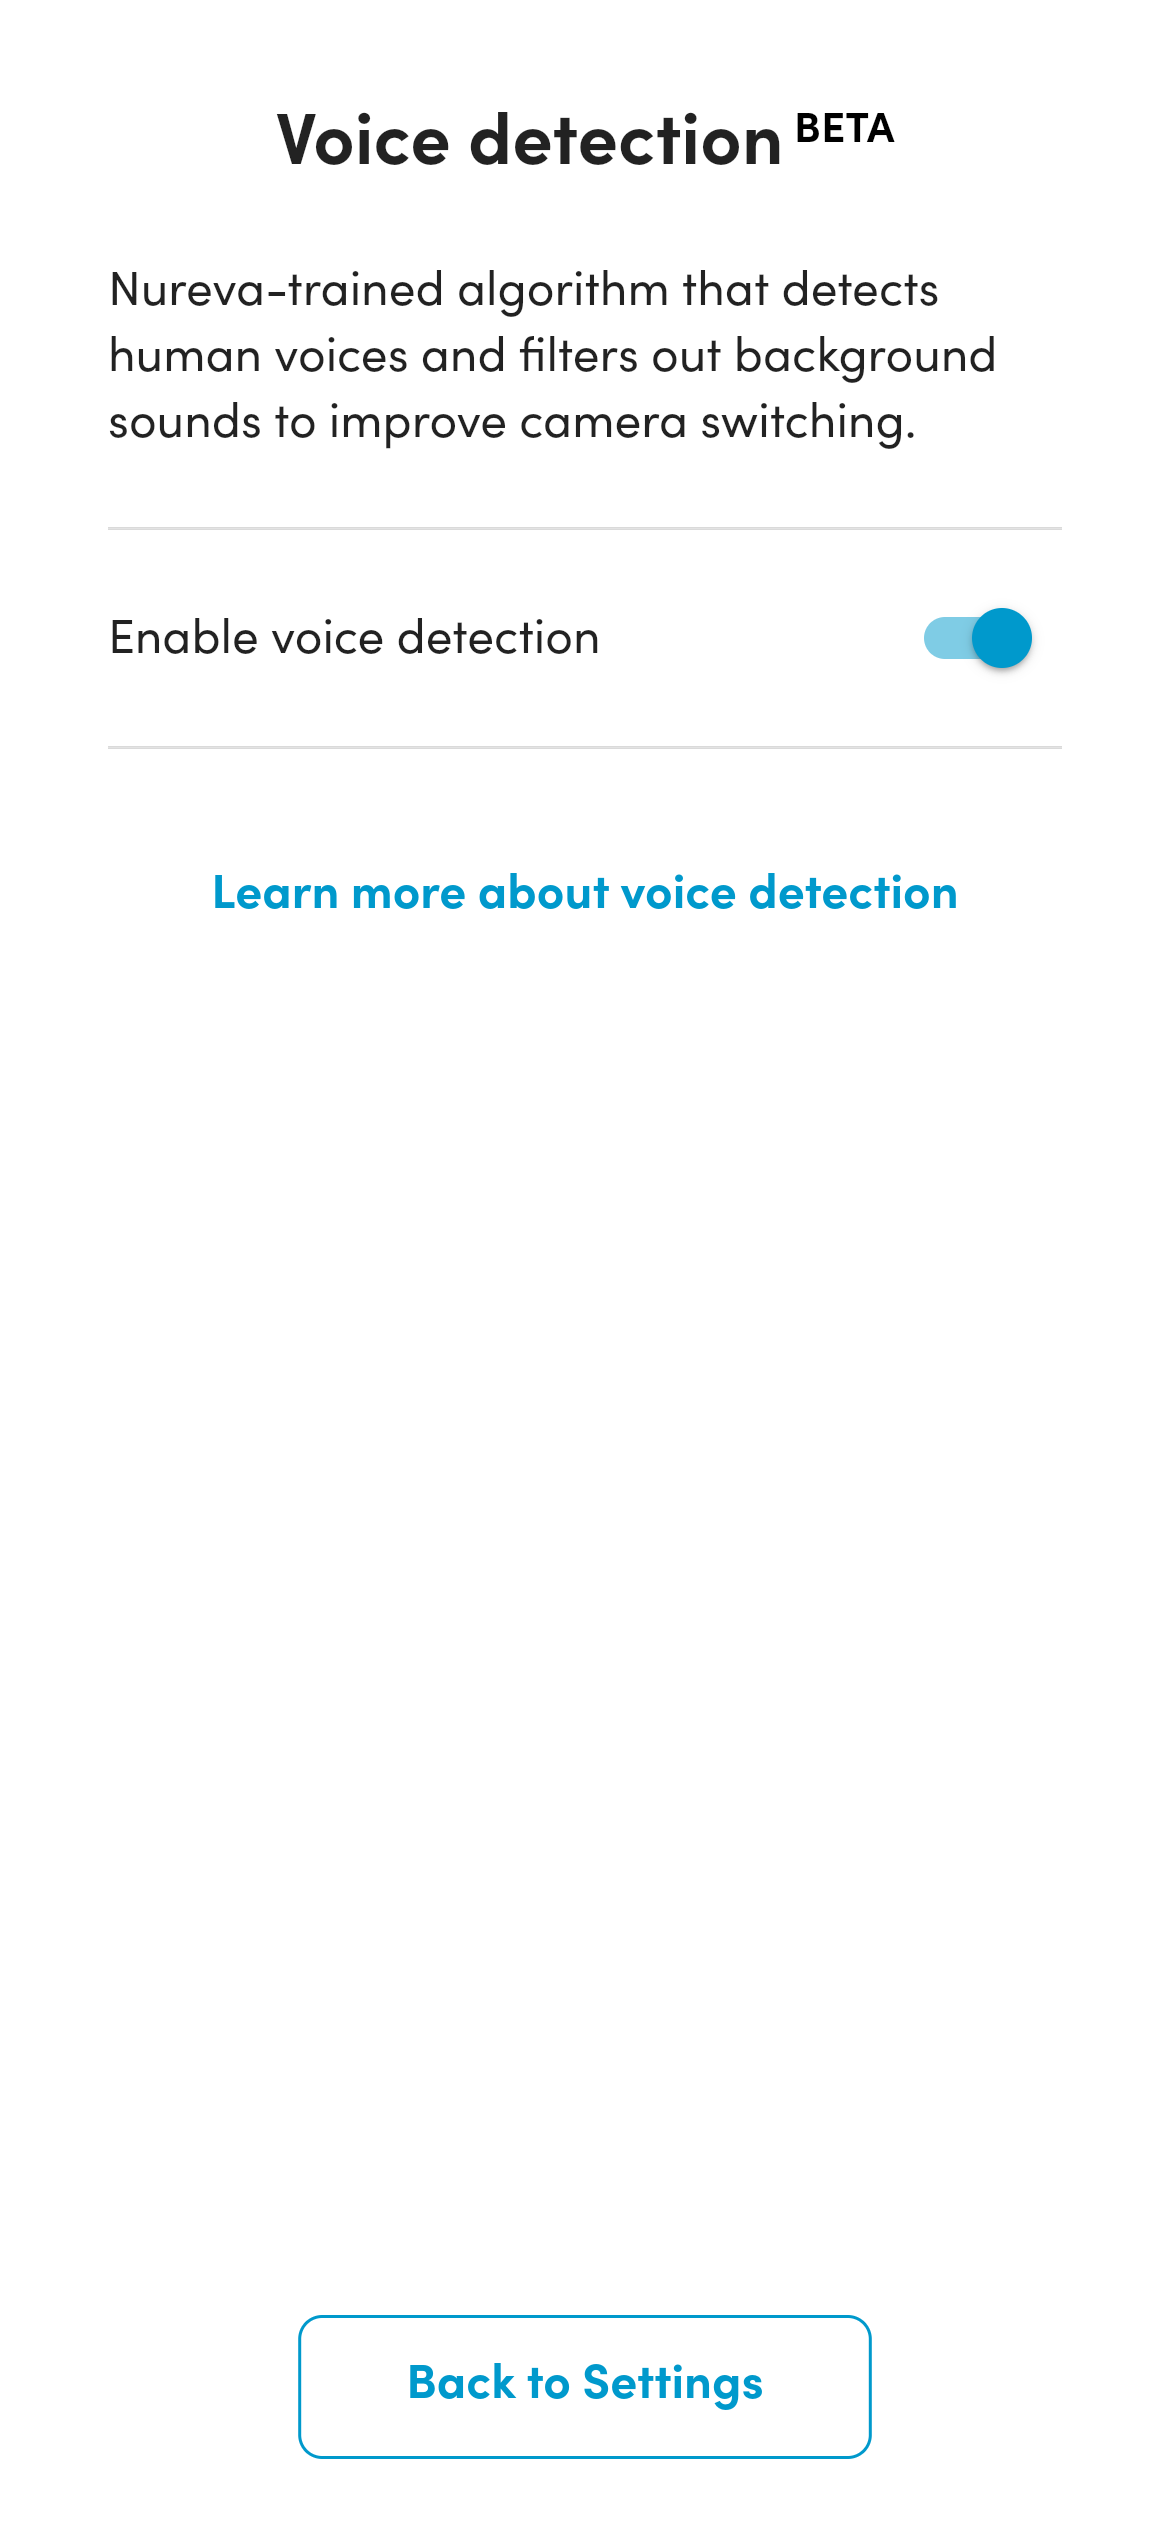 voice_detection_enable_mobile_05.24